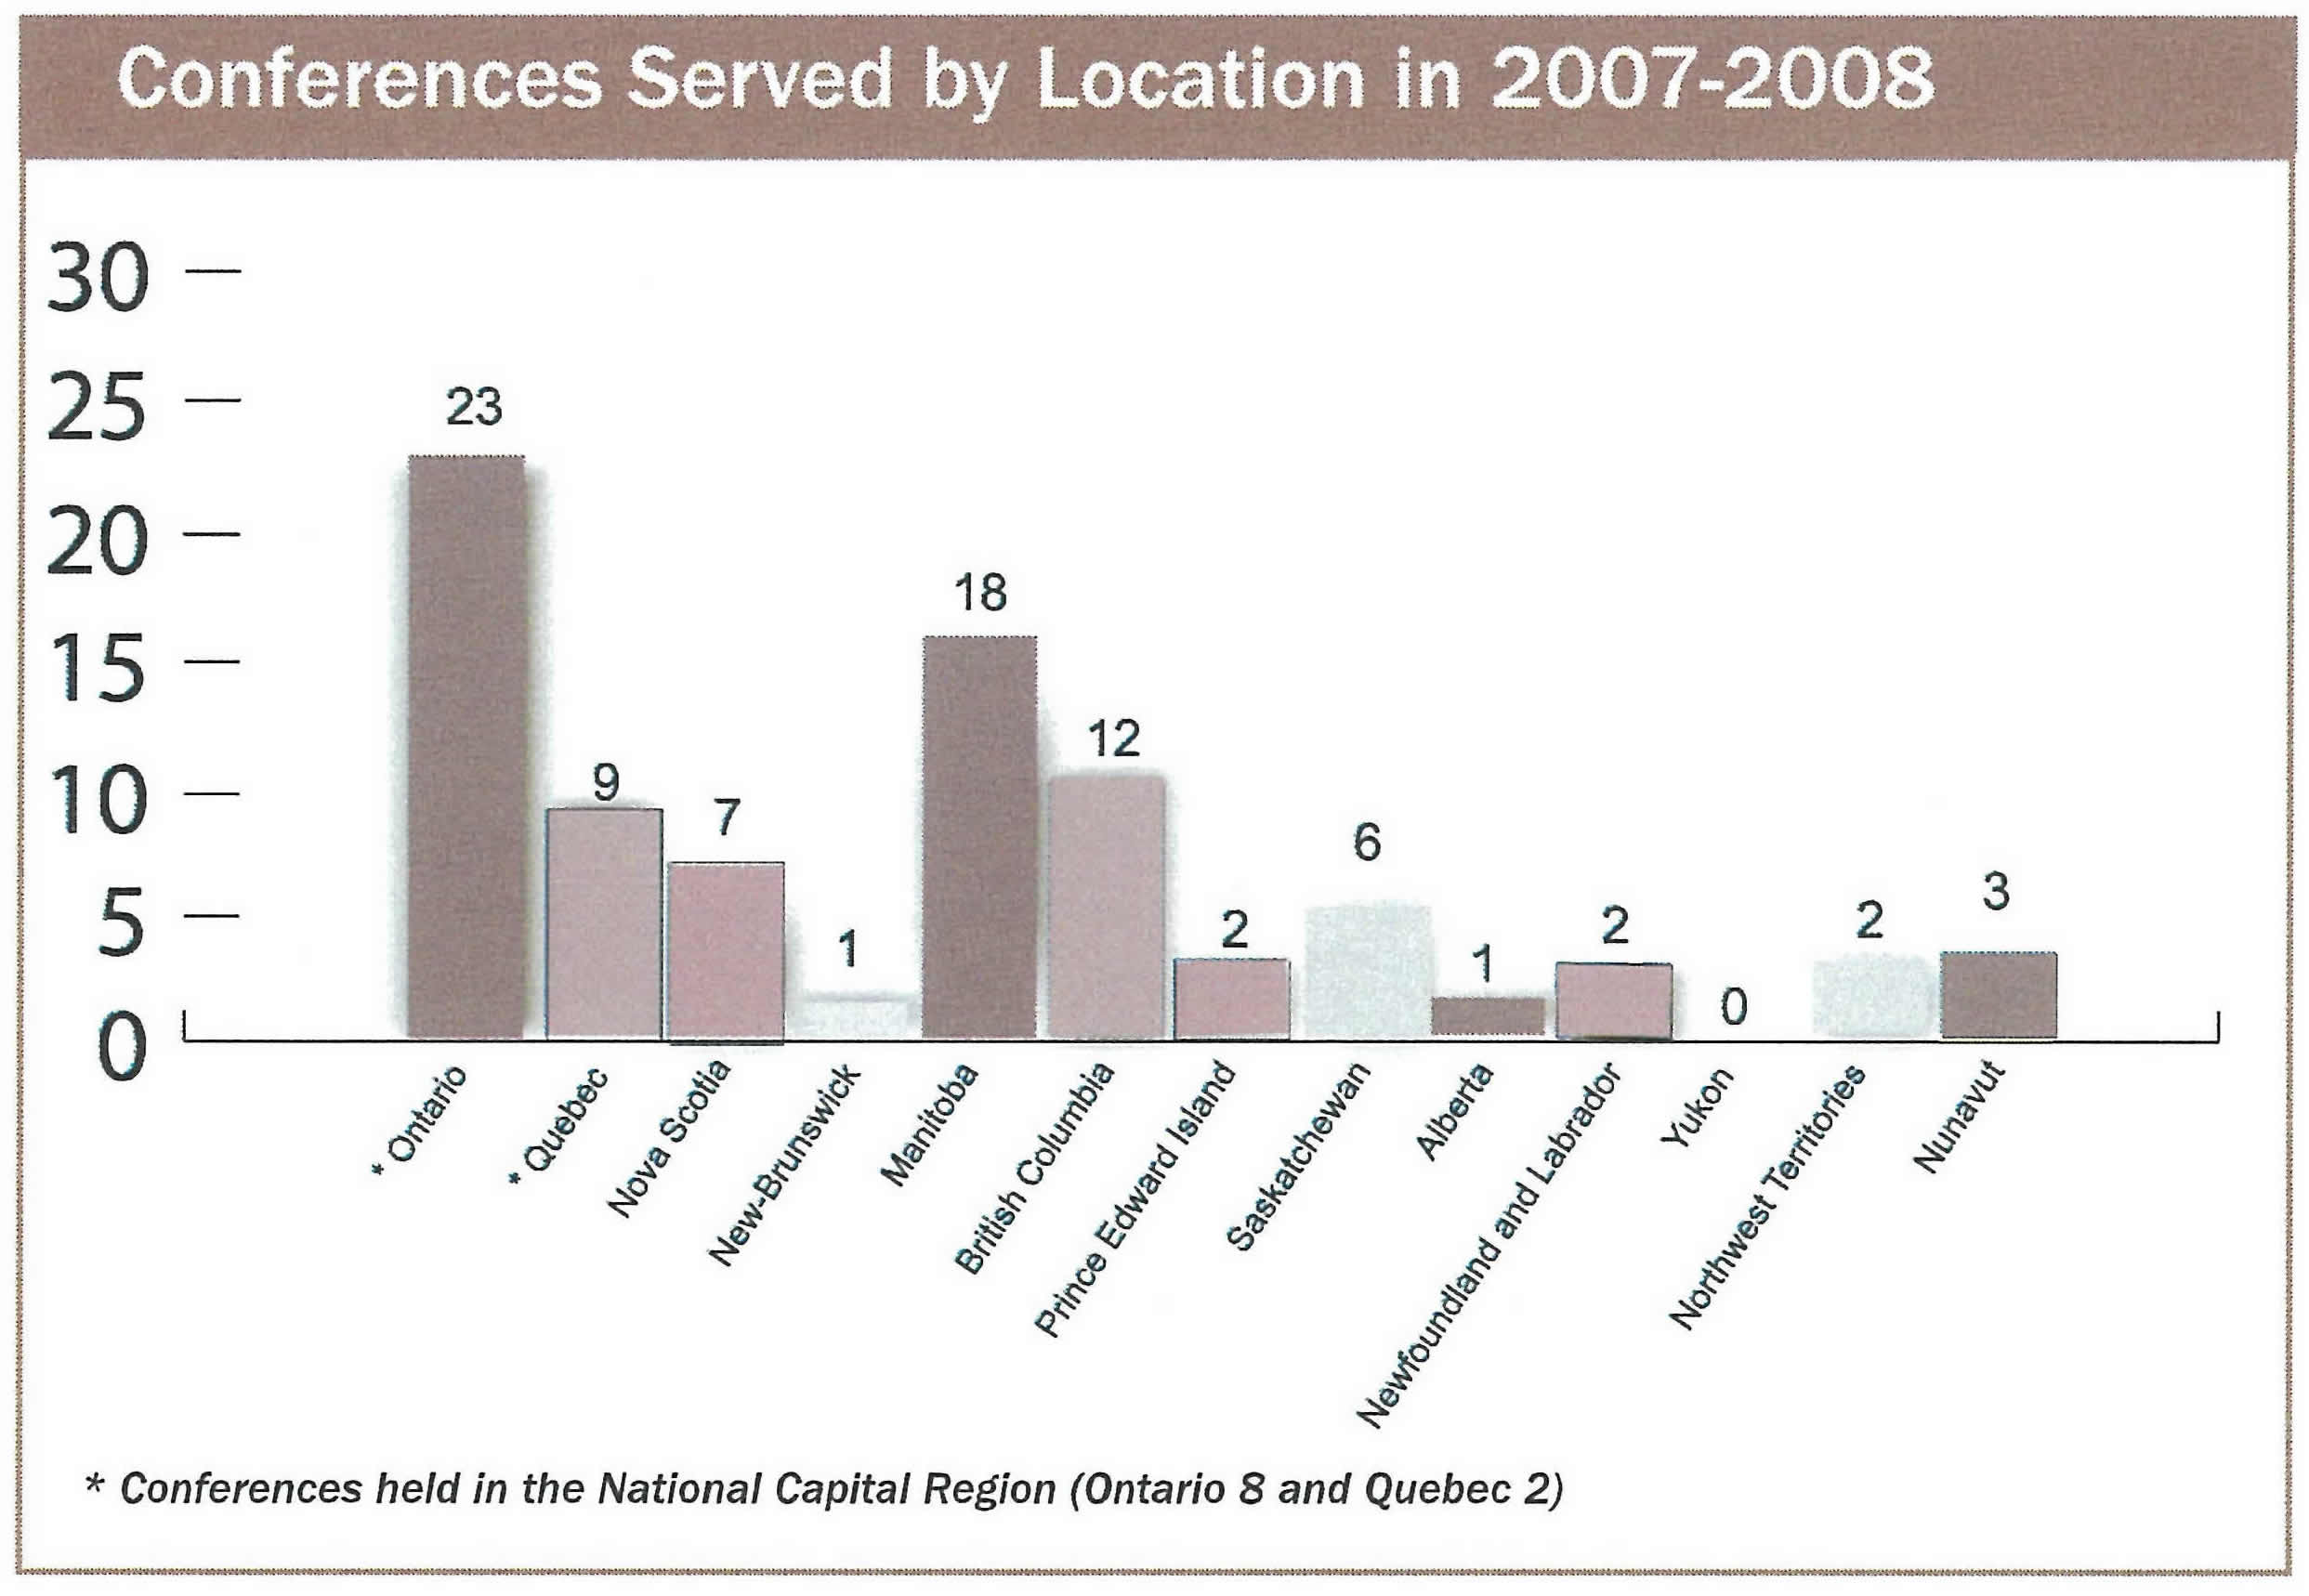 Number of conferences served in individual provinces and territories in 2007-2008.